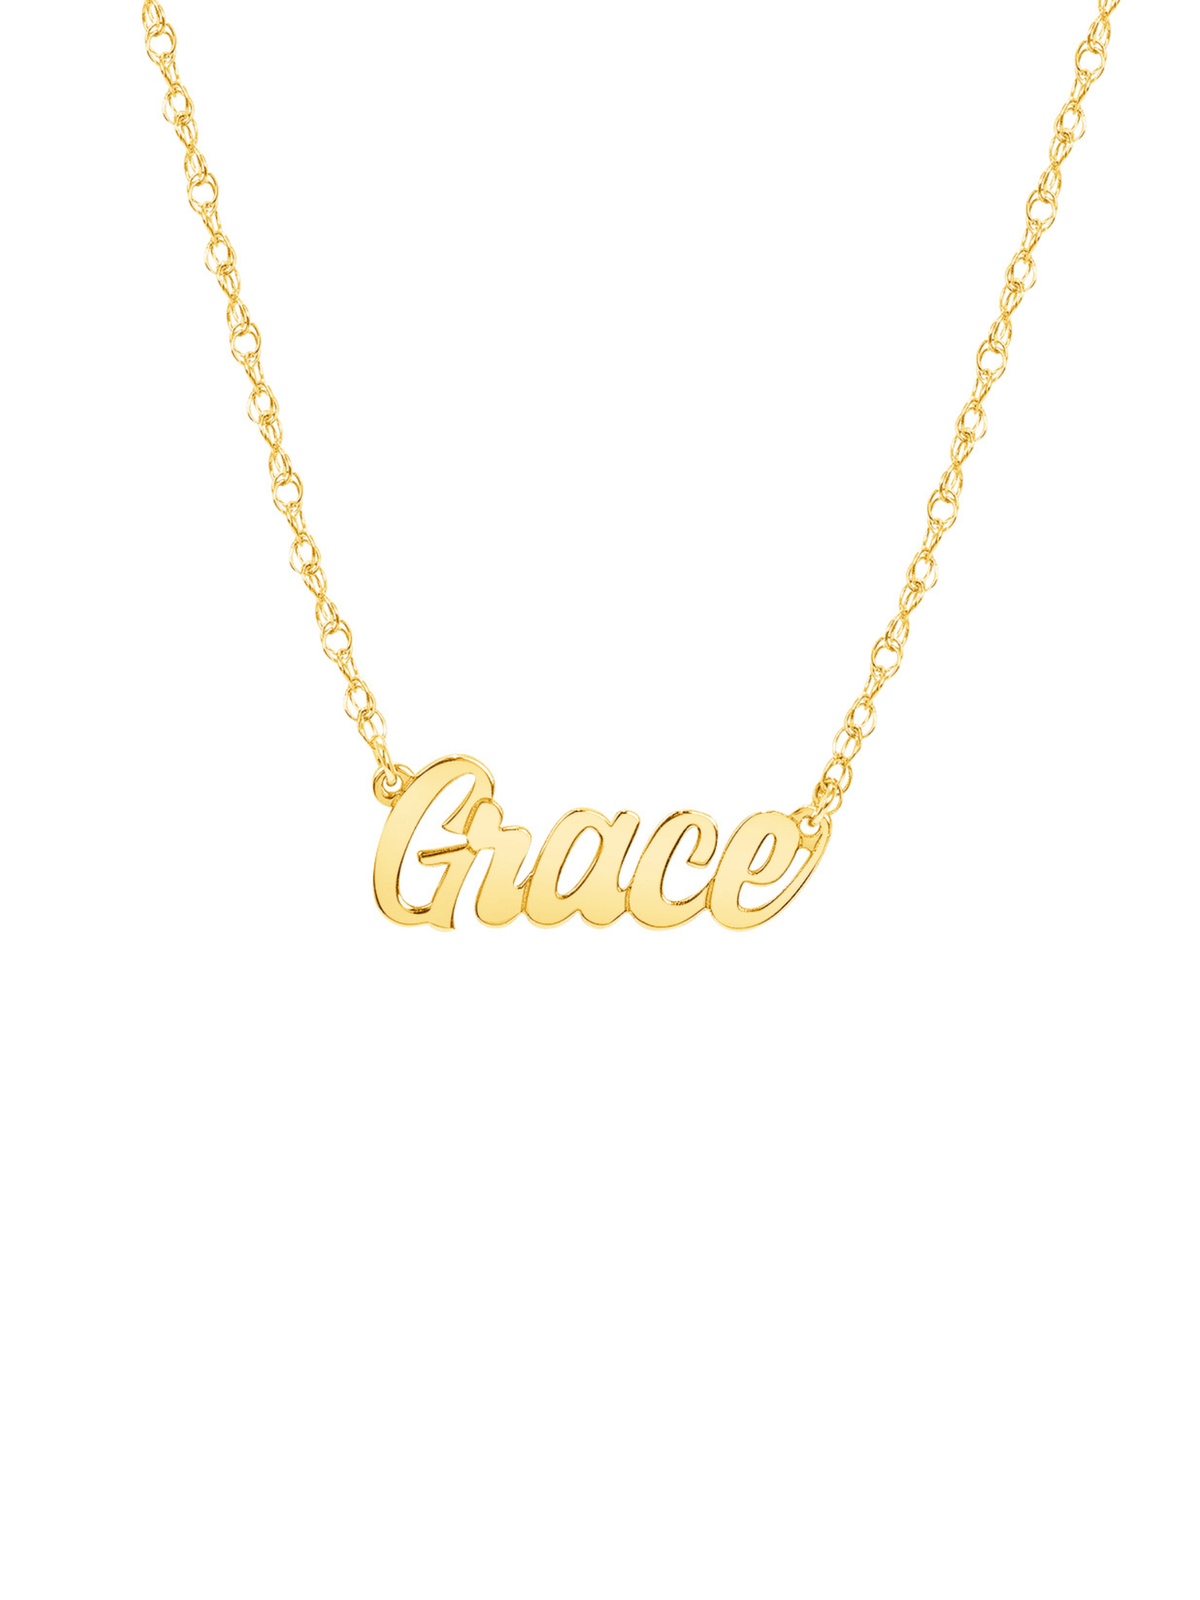 Yellow gold script name necklace on white background